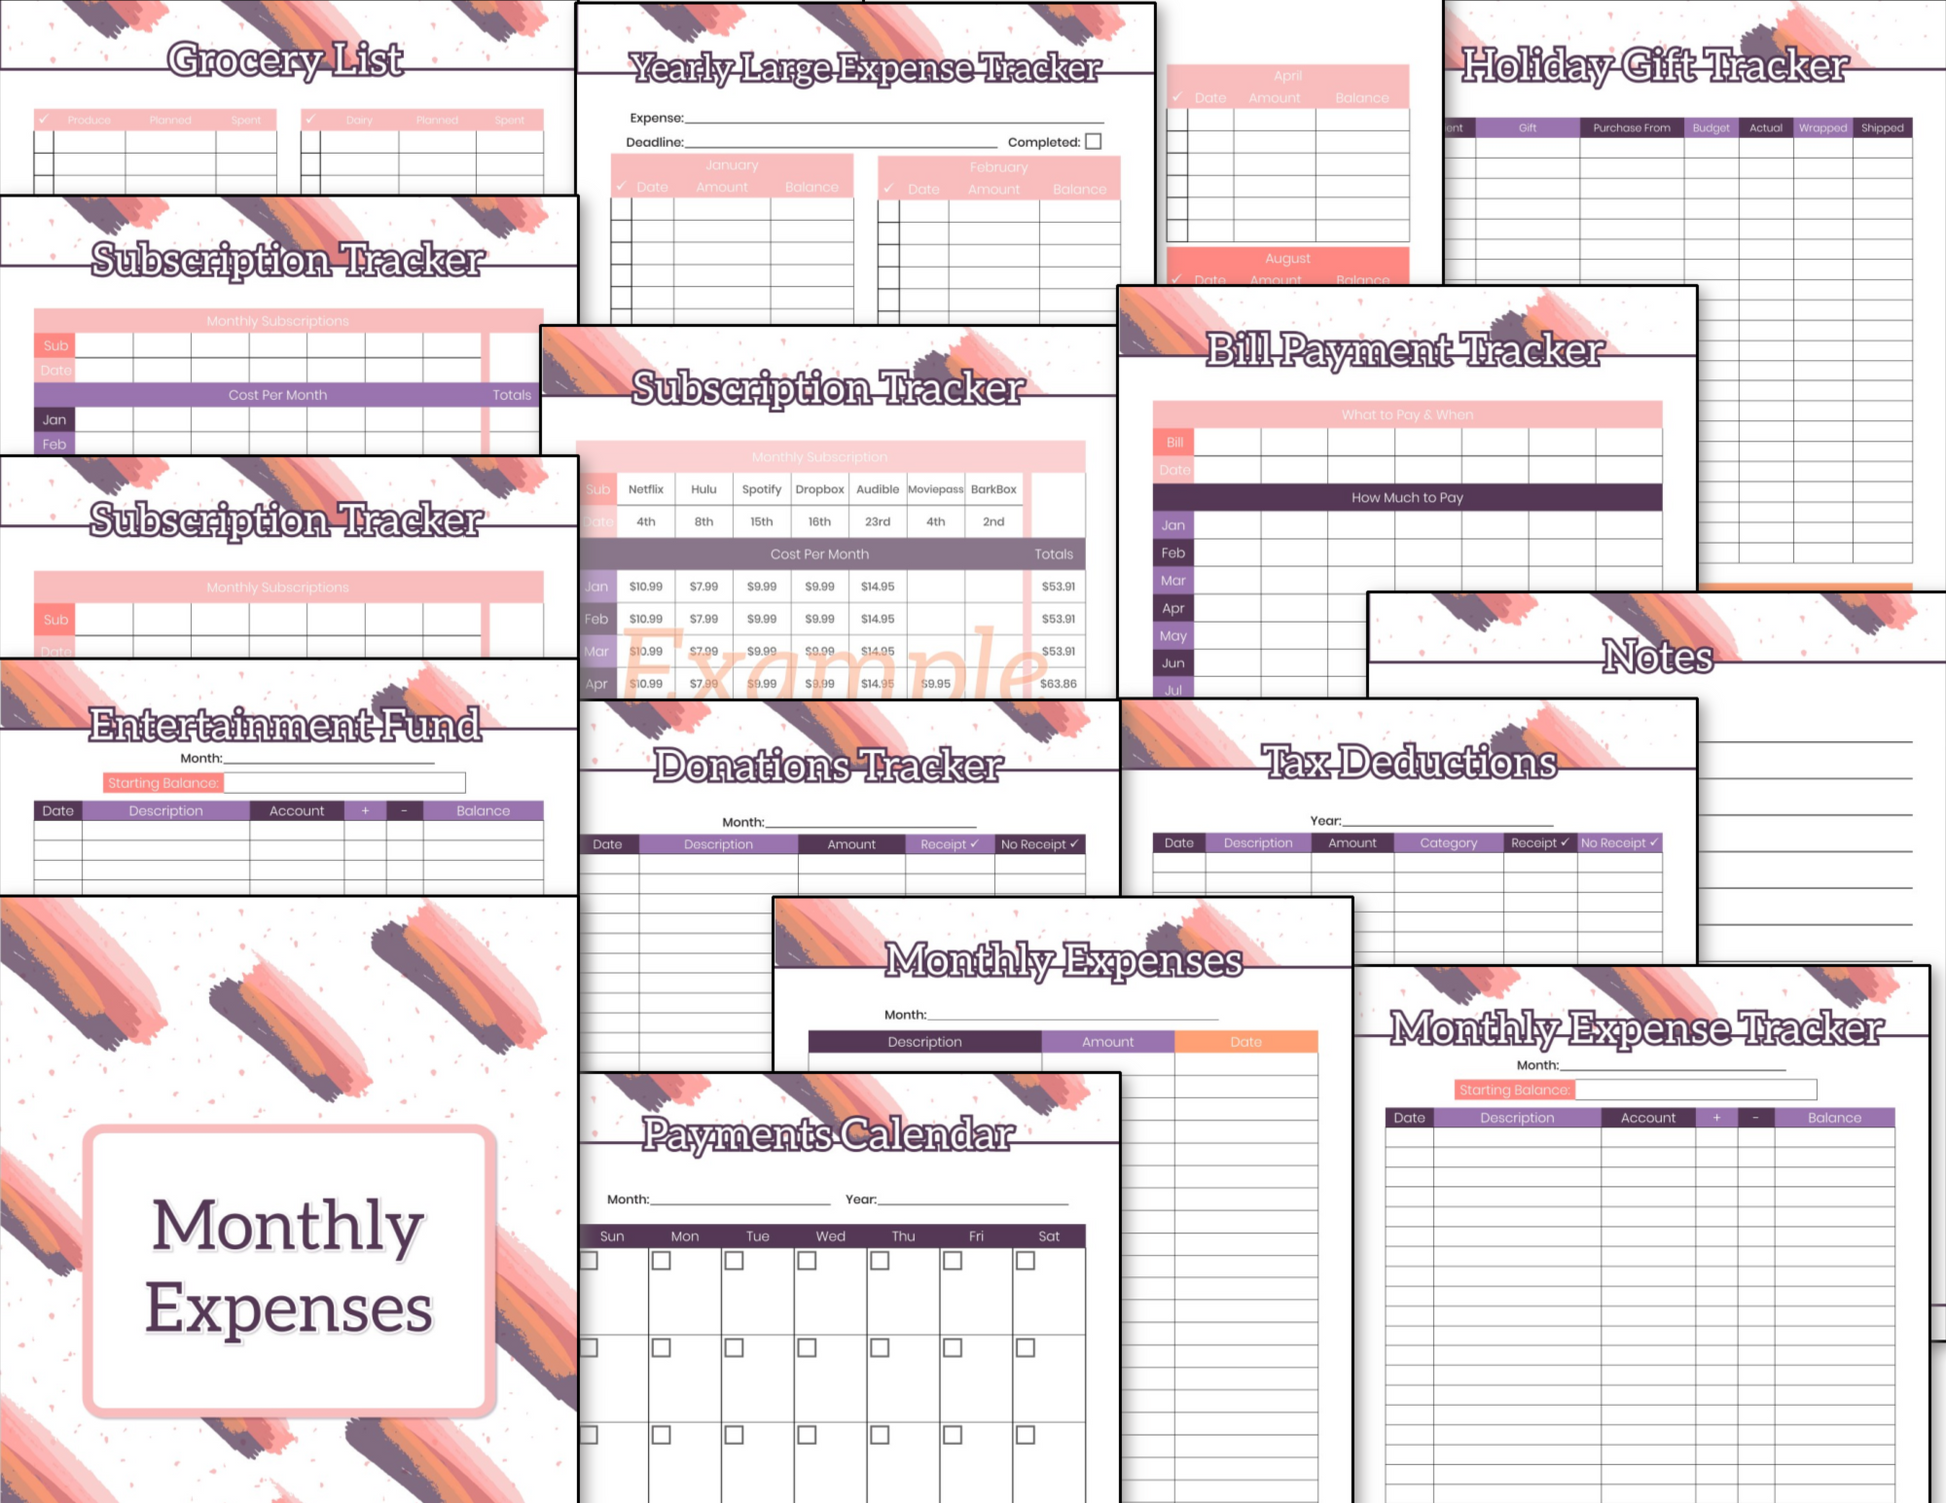 A collection of Budget Planner Binder - Pink and Grey Brushstroke monthly expense sheets from the Organized 31 Shop.